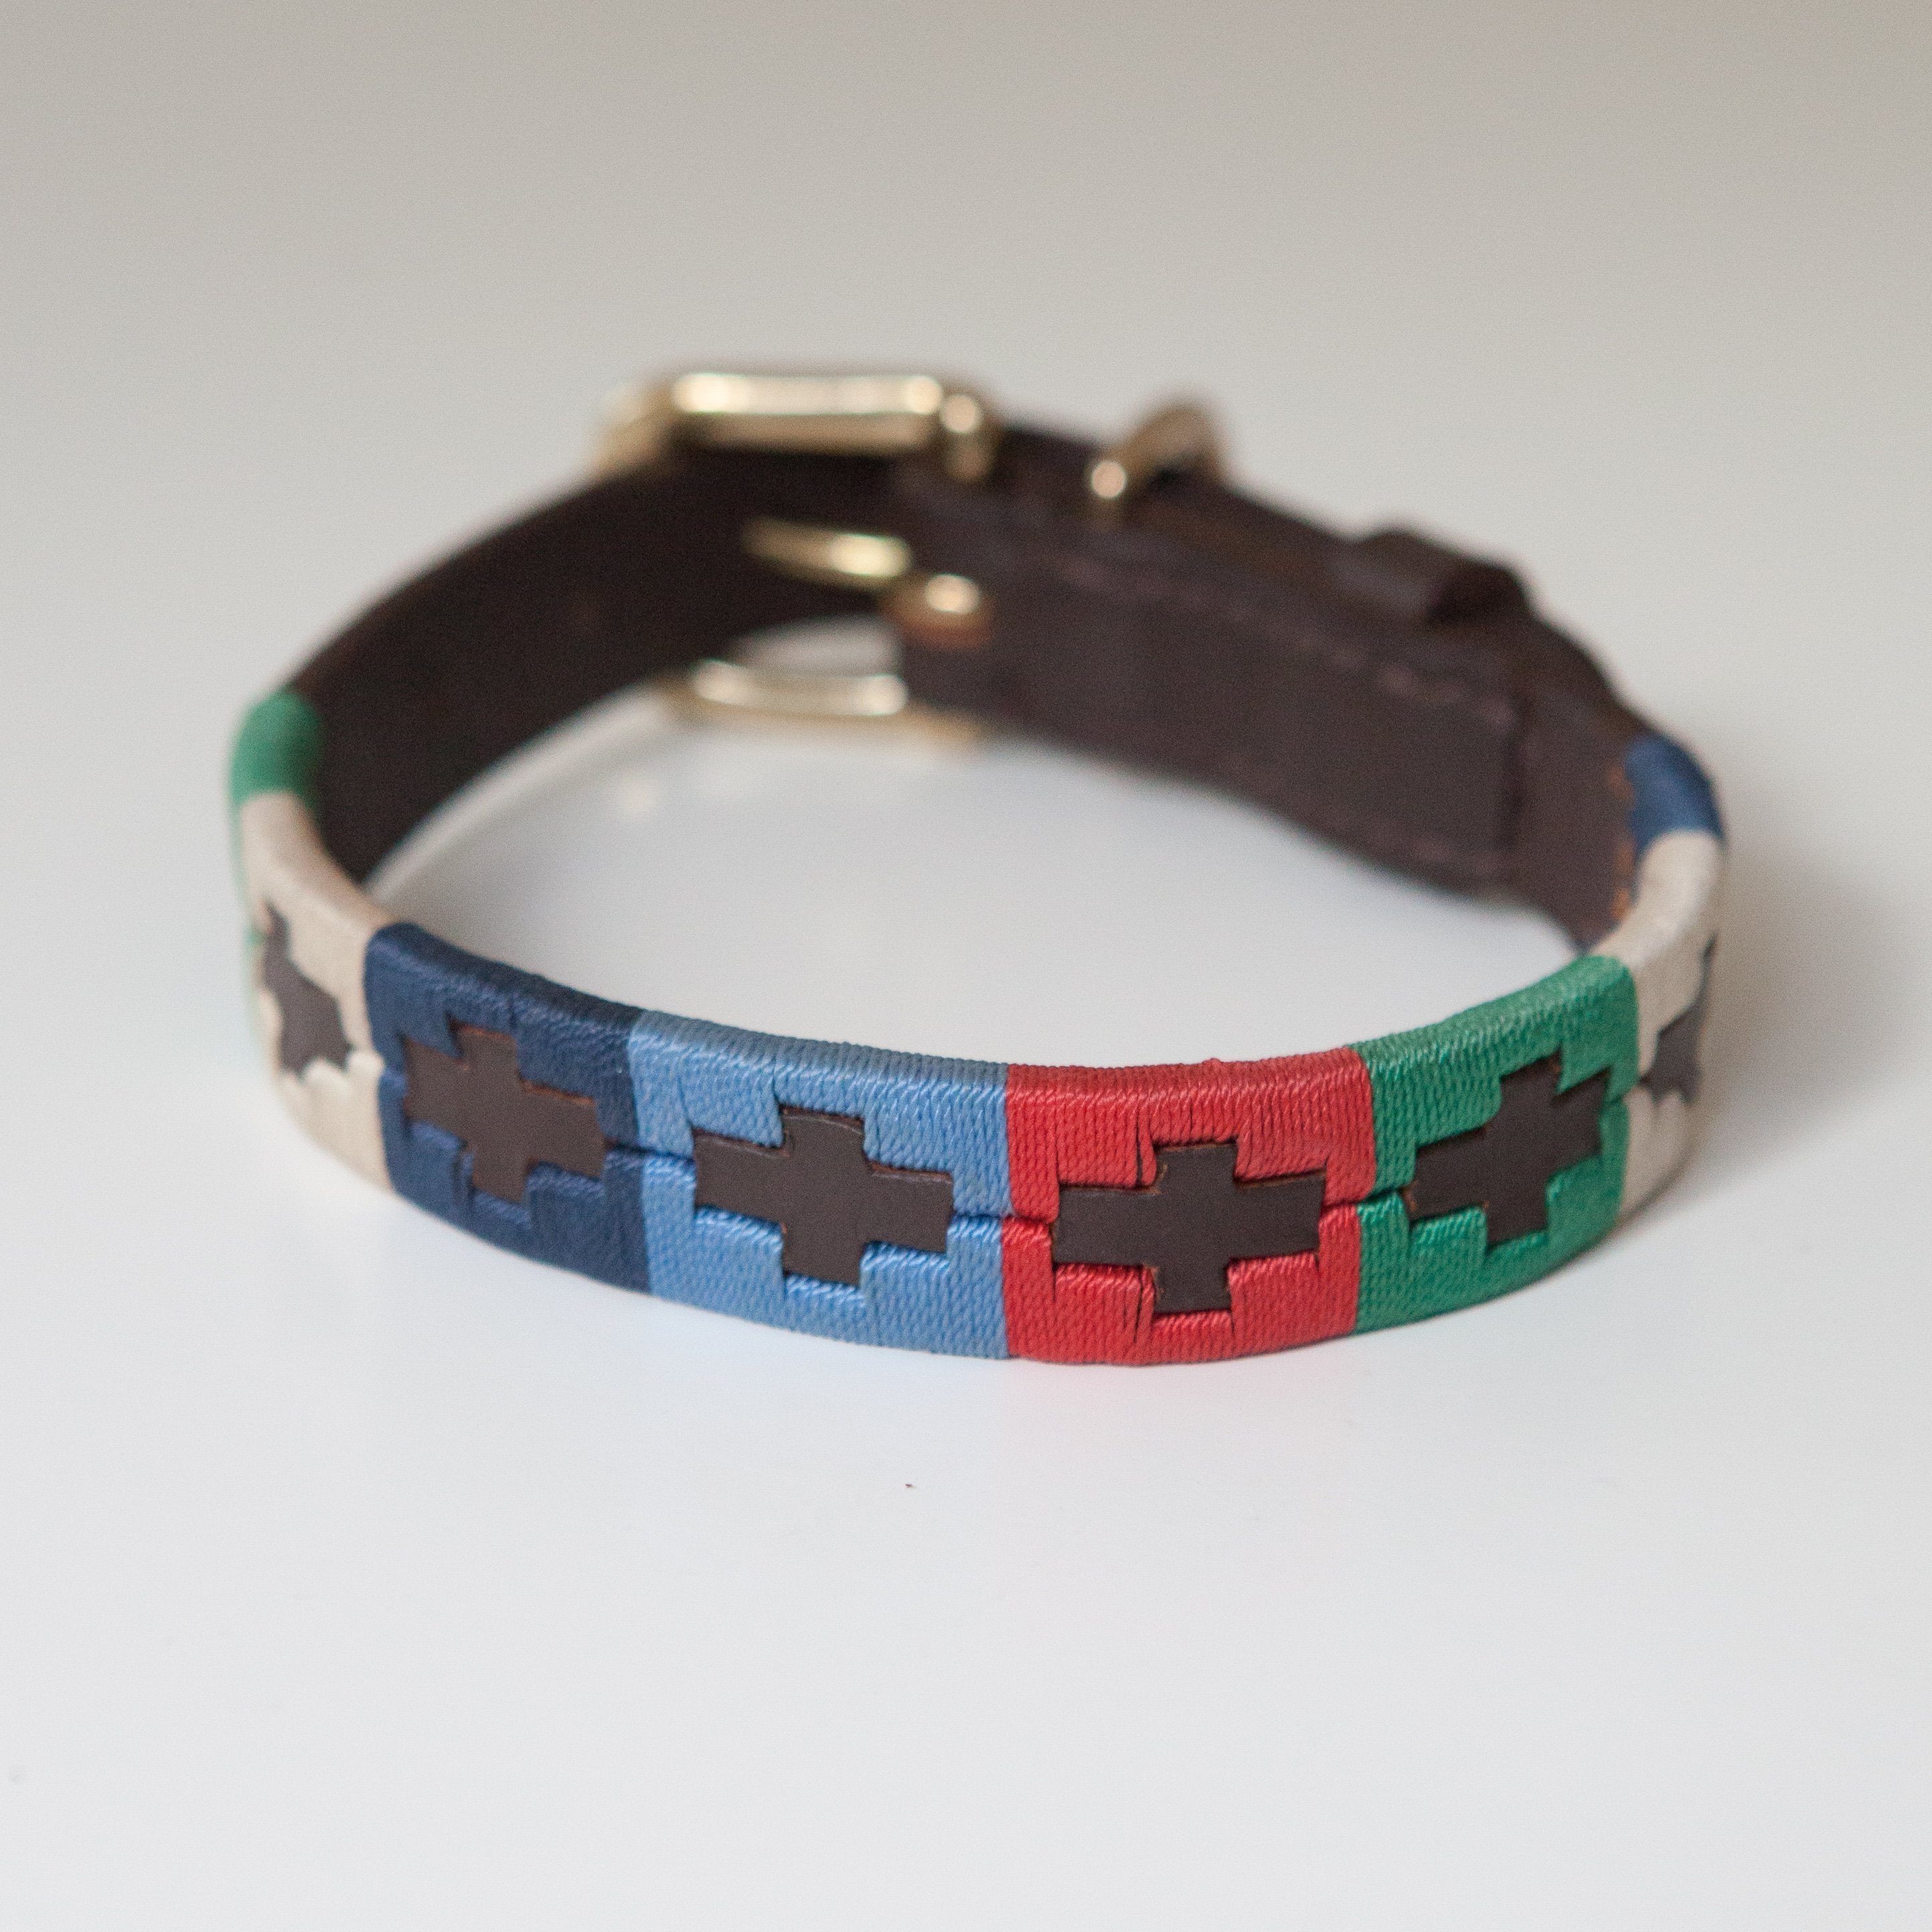 Good Dog Lunar Collar in brown leather blue red green cream small medium size